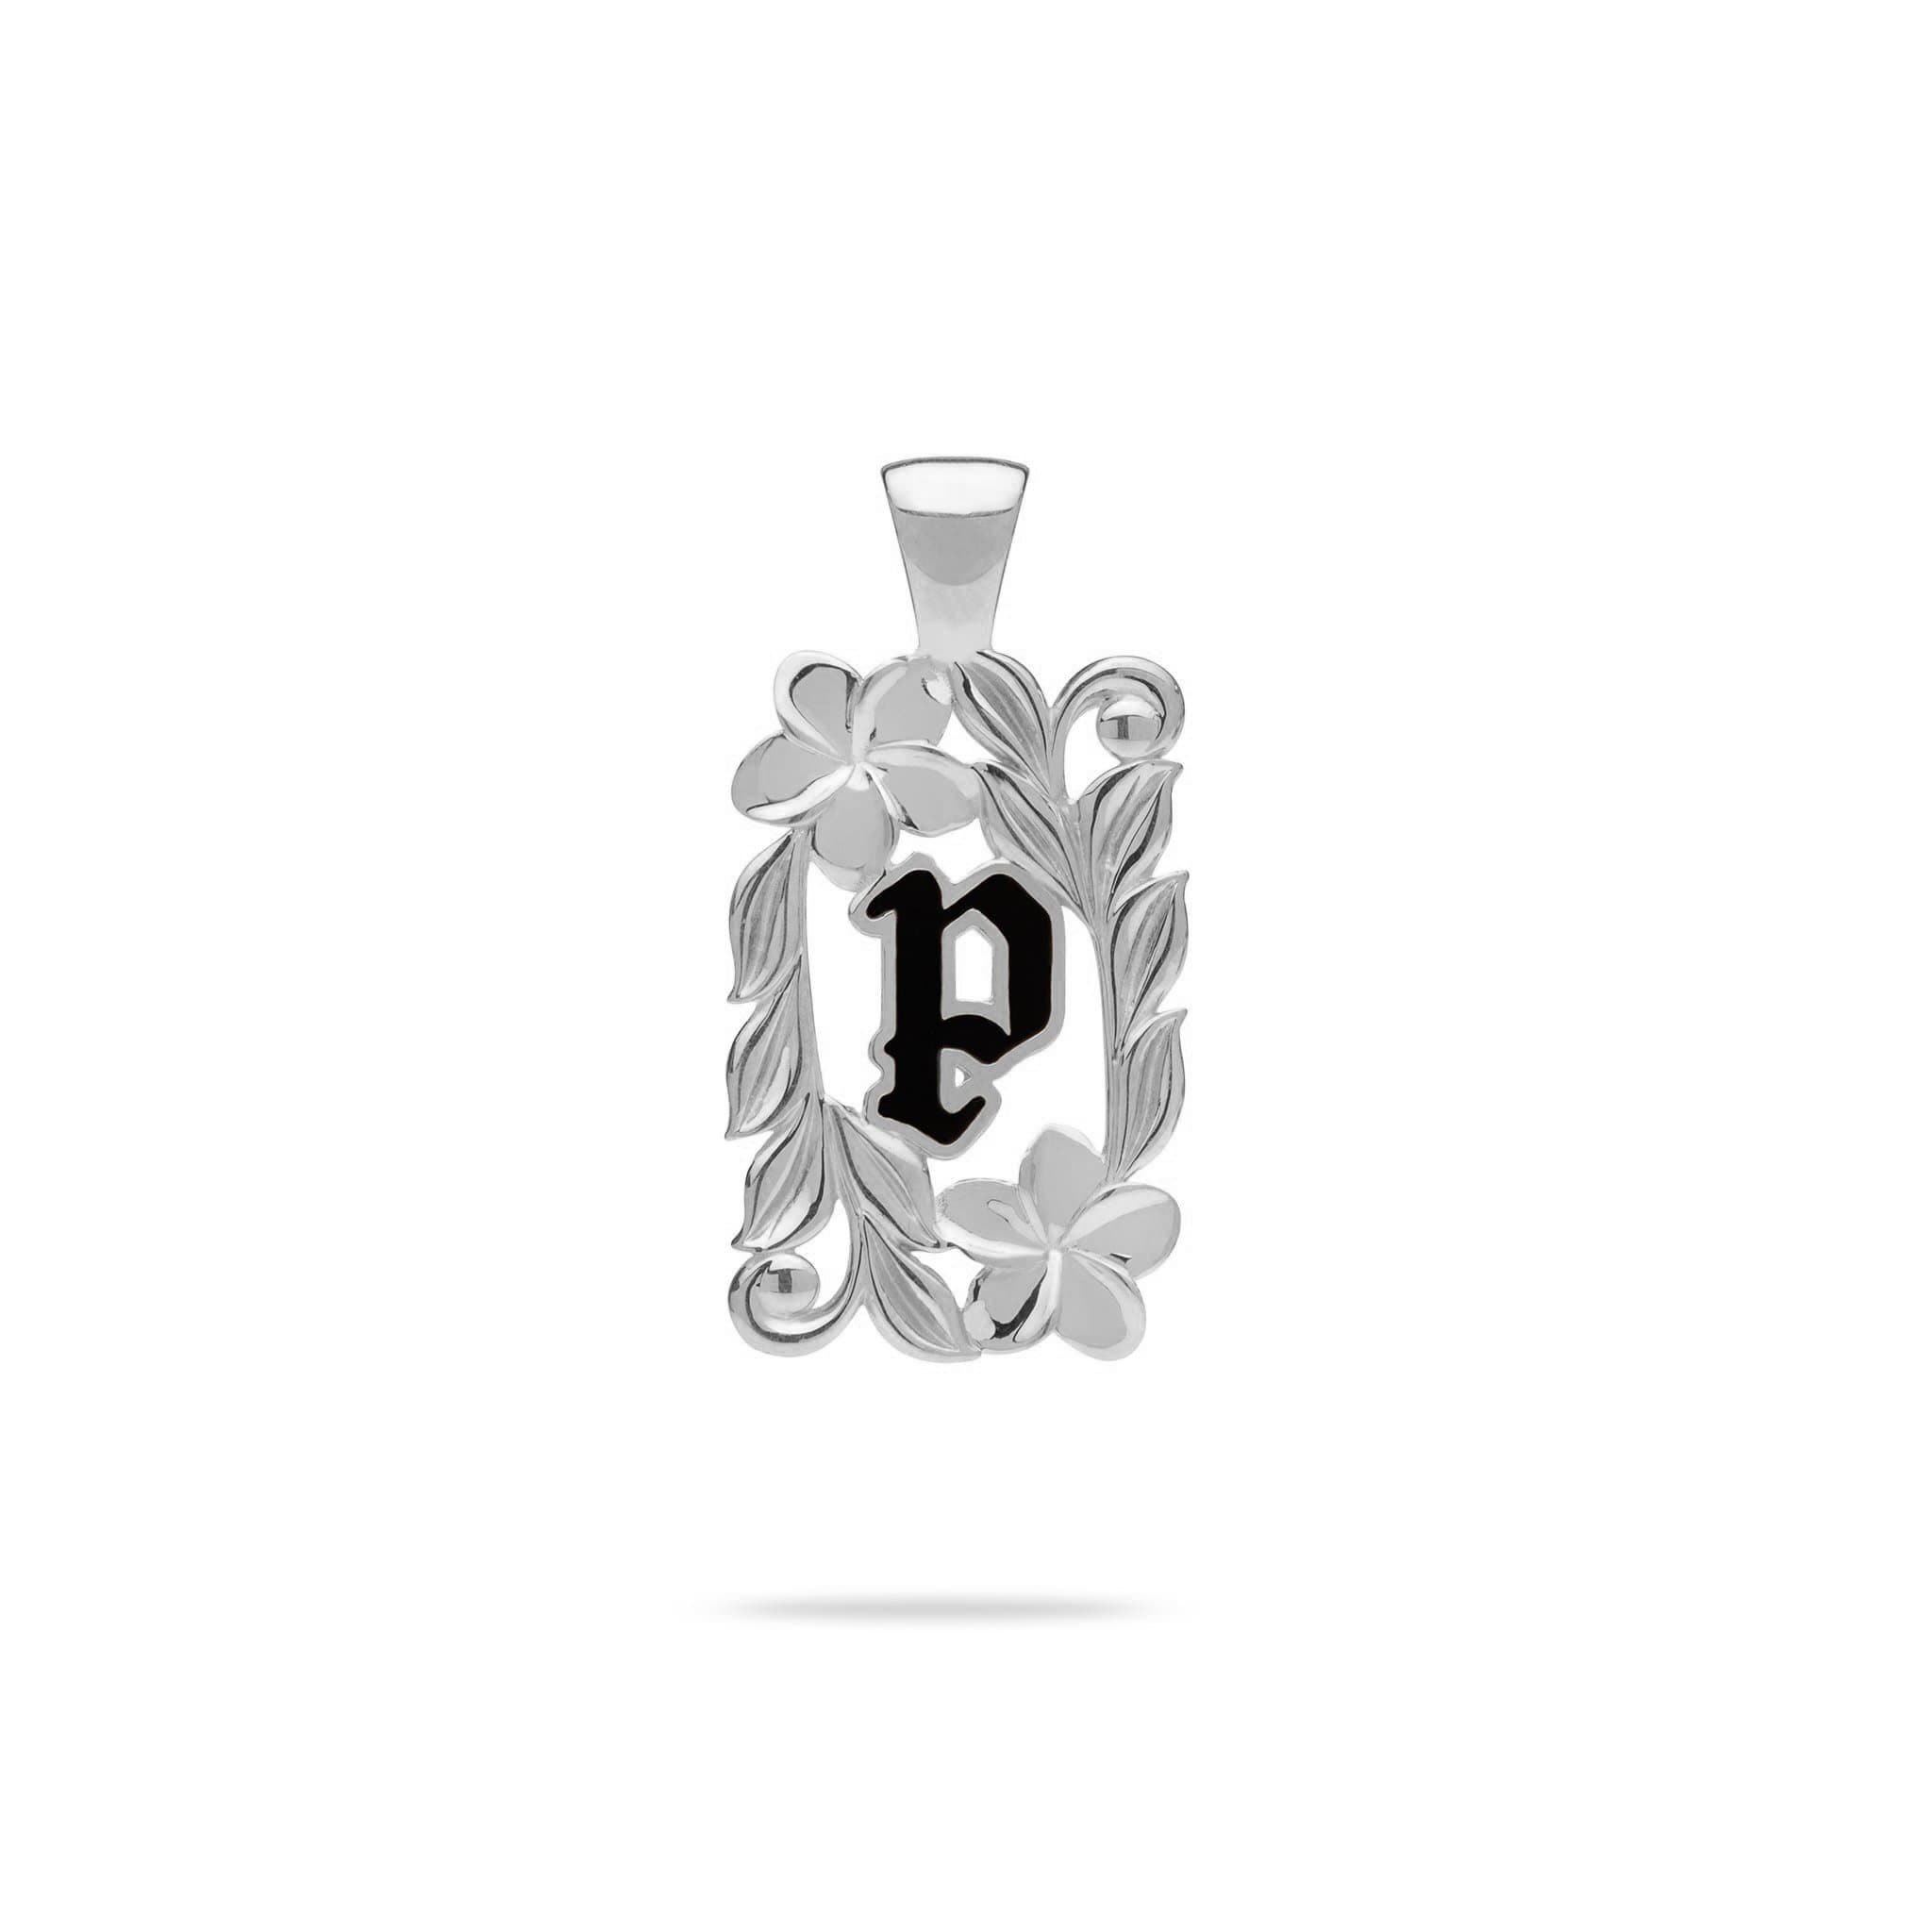 Special Order Hawaiian Heirloom Initial Pendant in White Gold - 014-03615-P-14W